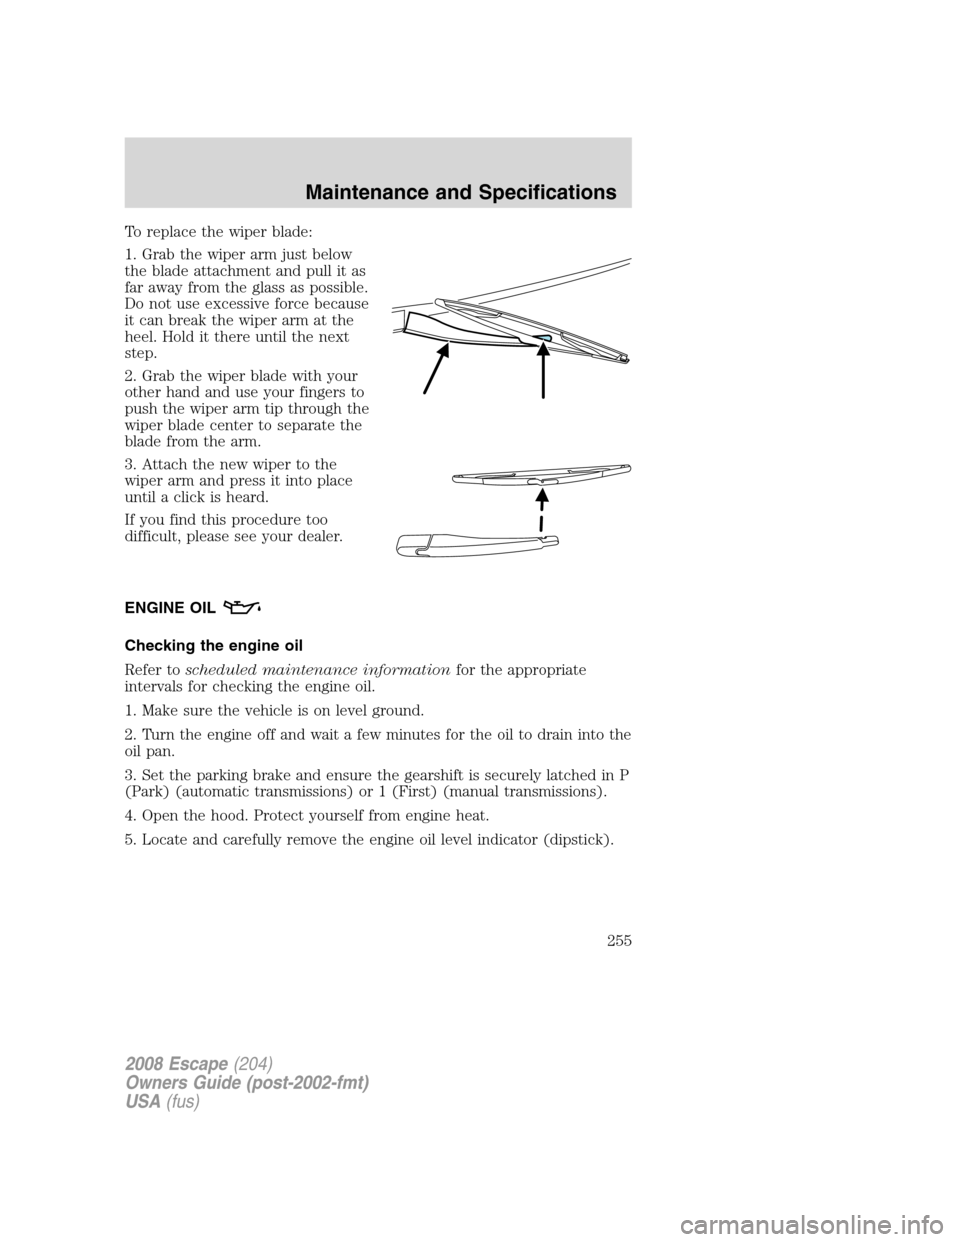 FORD ESCAPE 2008 2.G User Guide To replace the wiper blade:
1. Grab the wiper arm just below
the blade attachment and pull it as
far away from the glass as possible.
Do not use excessive force because
it can break the wiper arm at t